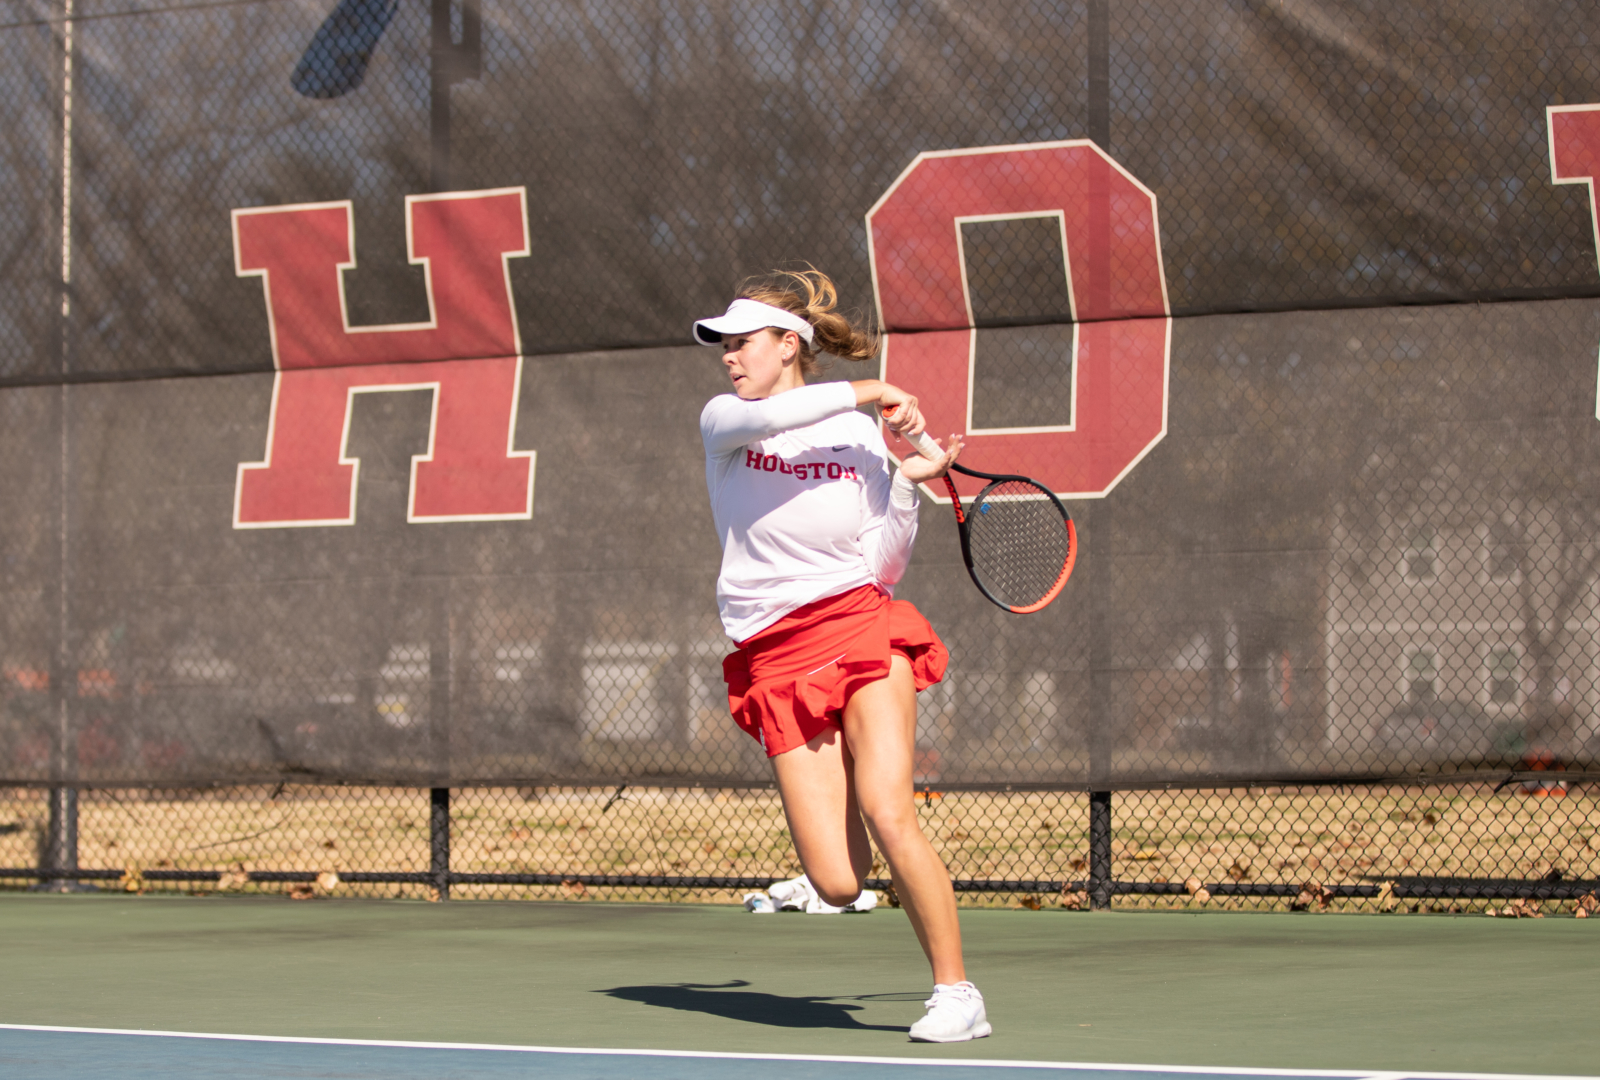 Sophomore Laura Slisane went undefeated over the weekend in both doubles in singles play, coming away with wins in both doubles matches and winning her lone singles match to propel UH to their eighth win of the season. | Sean Thomas/The Cougar